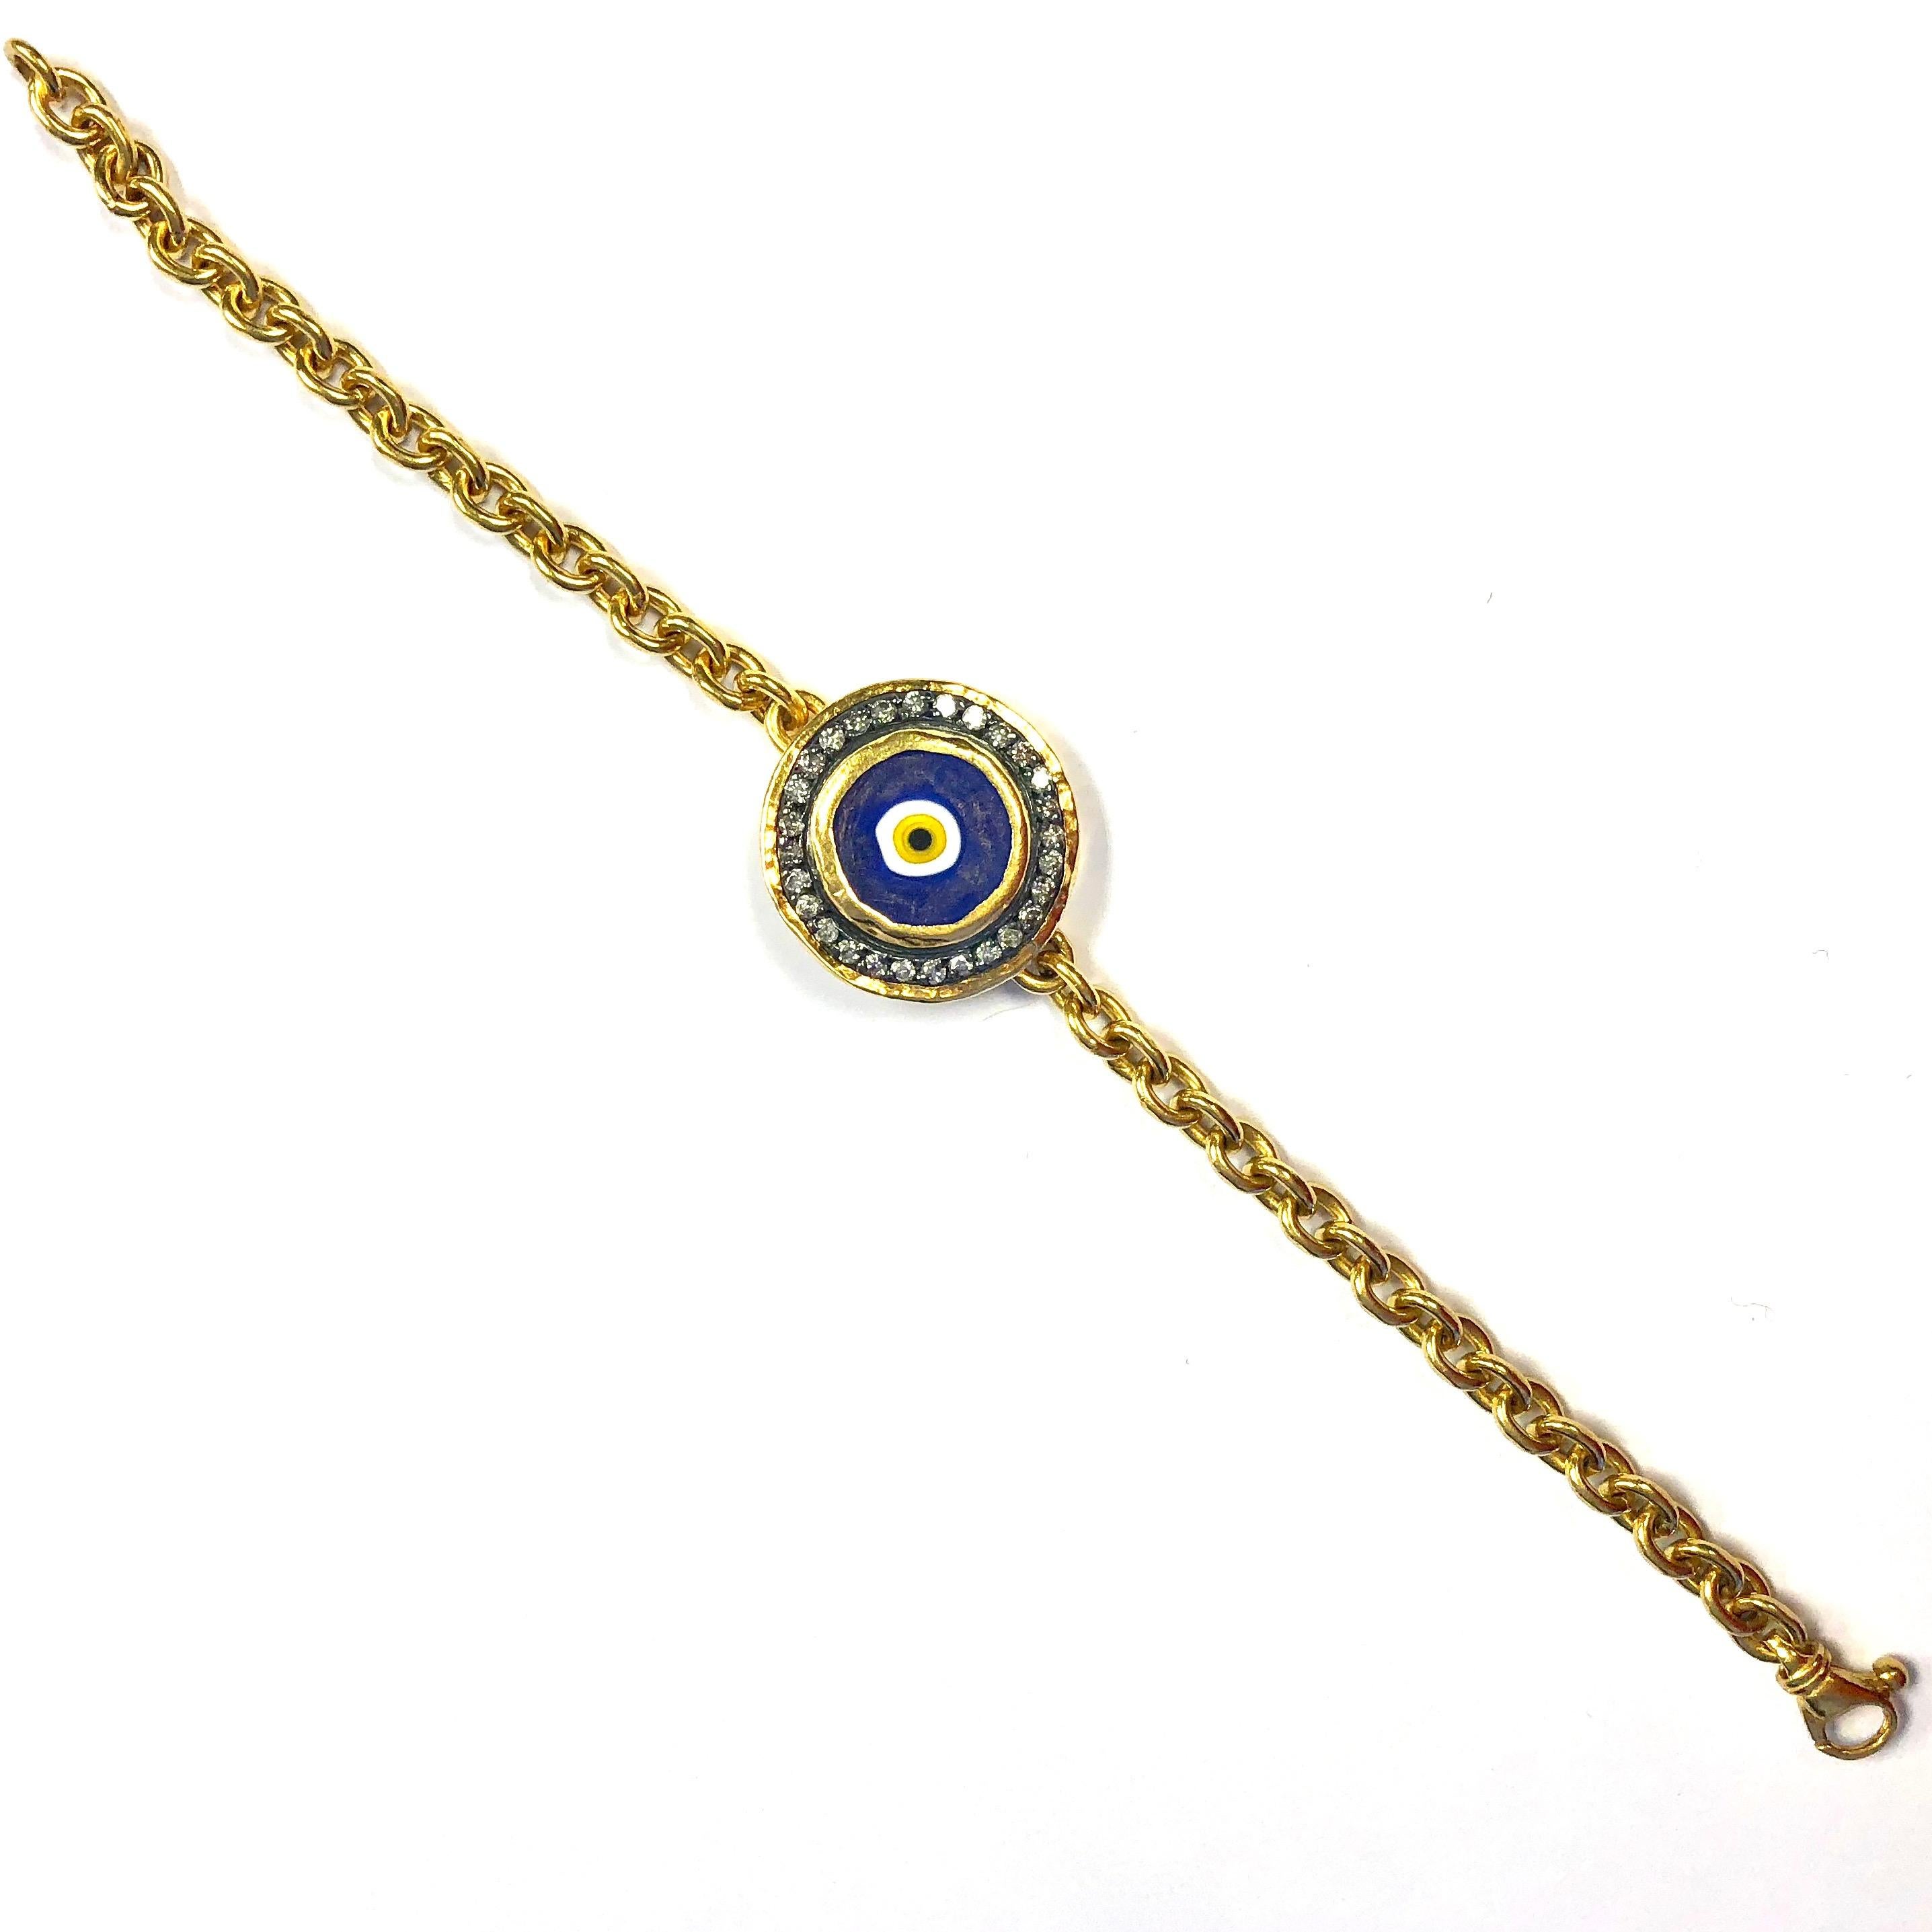 ARA dark blue evil eye and diamonds set in 24k gold and oxidized sterling silver center, supported by a 24k gold link bracelet. 
28 round brilliant cut diamonds, approximate total weight: 0.60 ct 
Weight: 23.1 grams
Length: 7.5 inches
Current retail